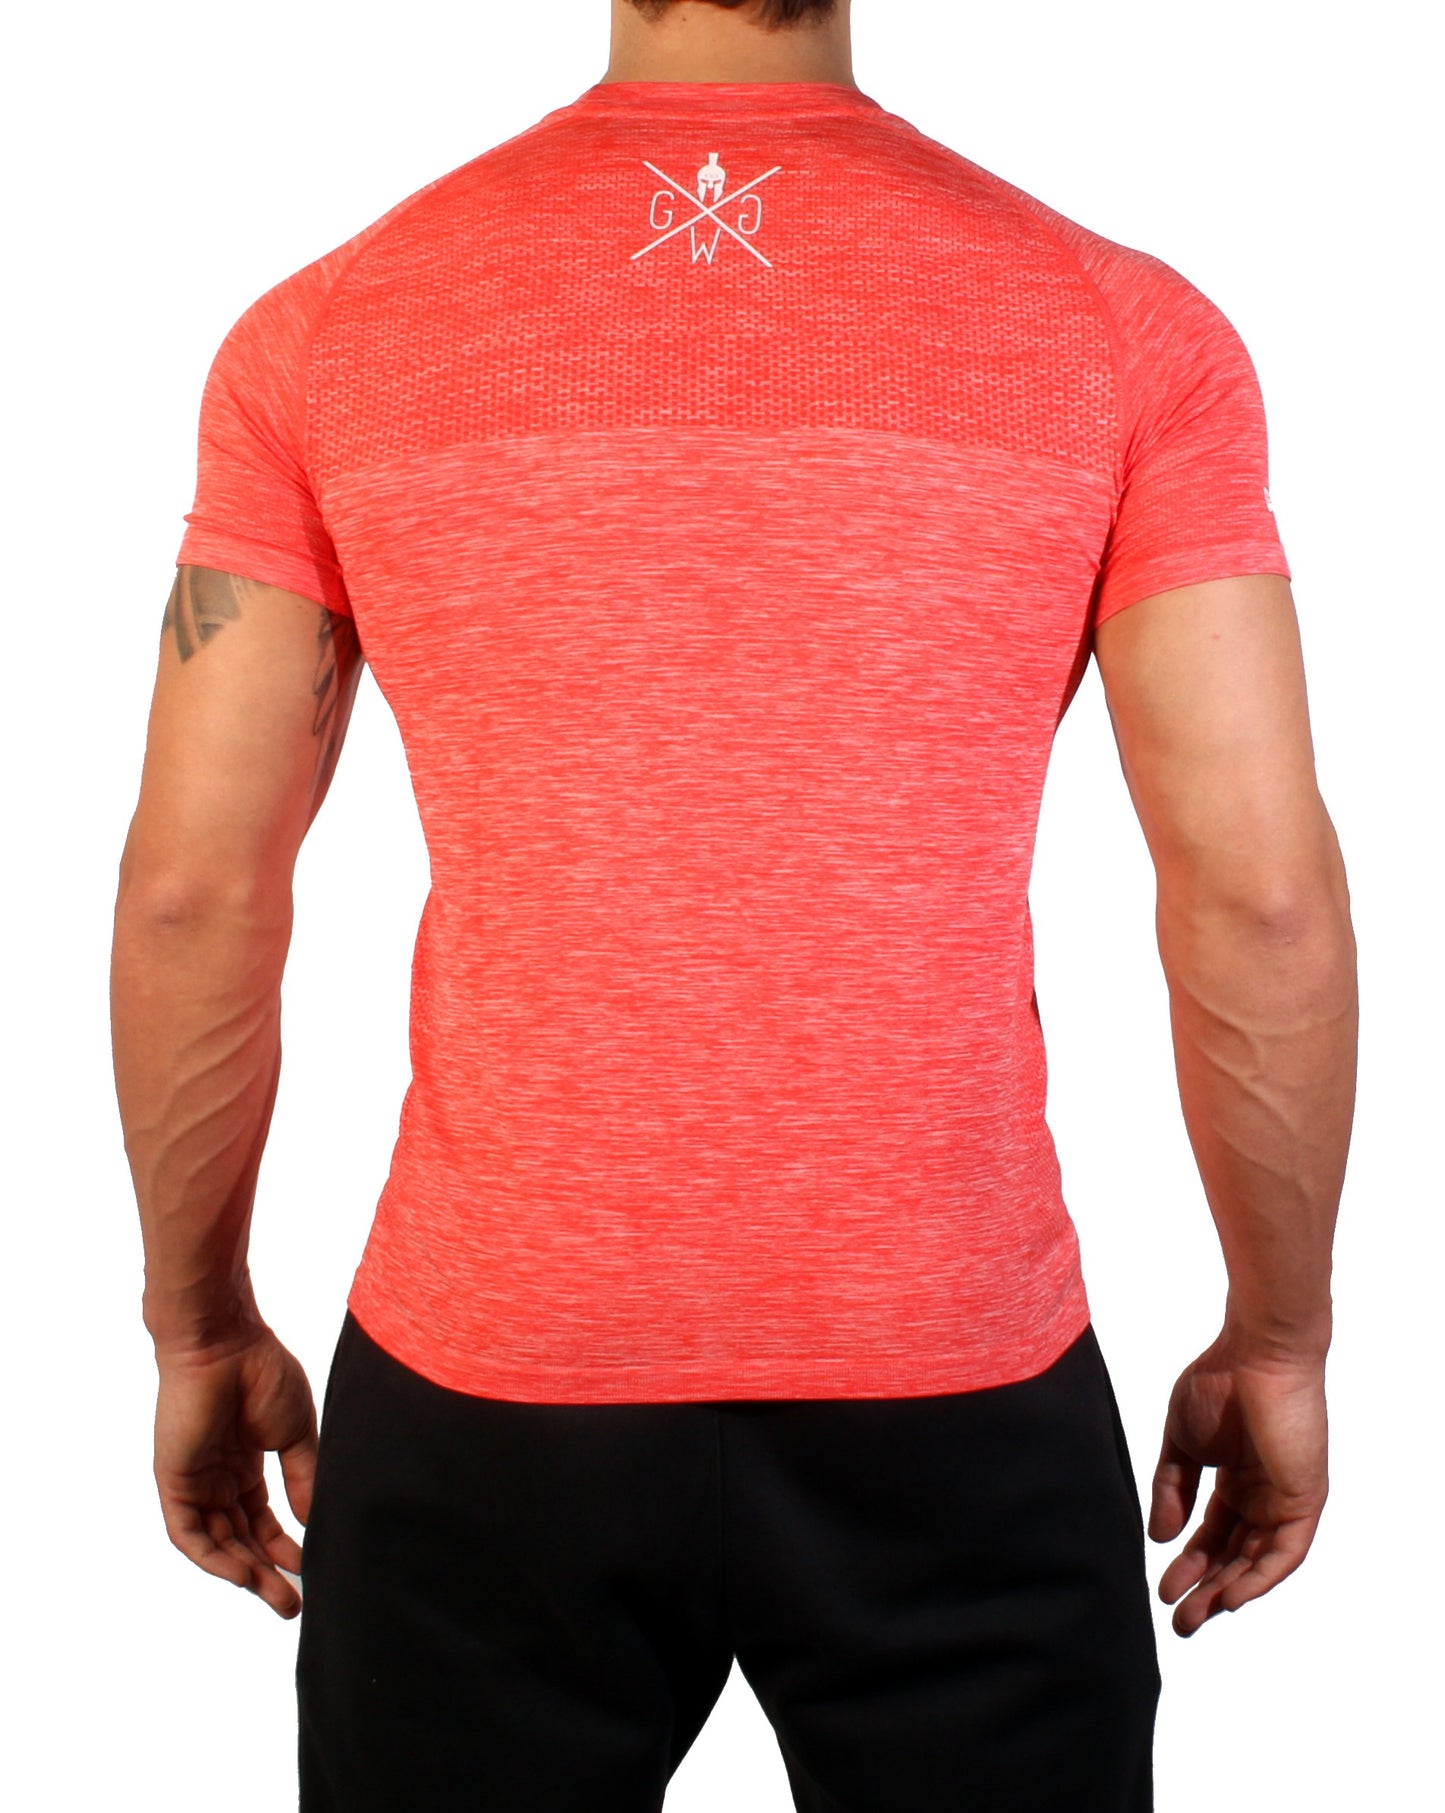 Camisa fitness sin costuras - Flame Red